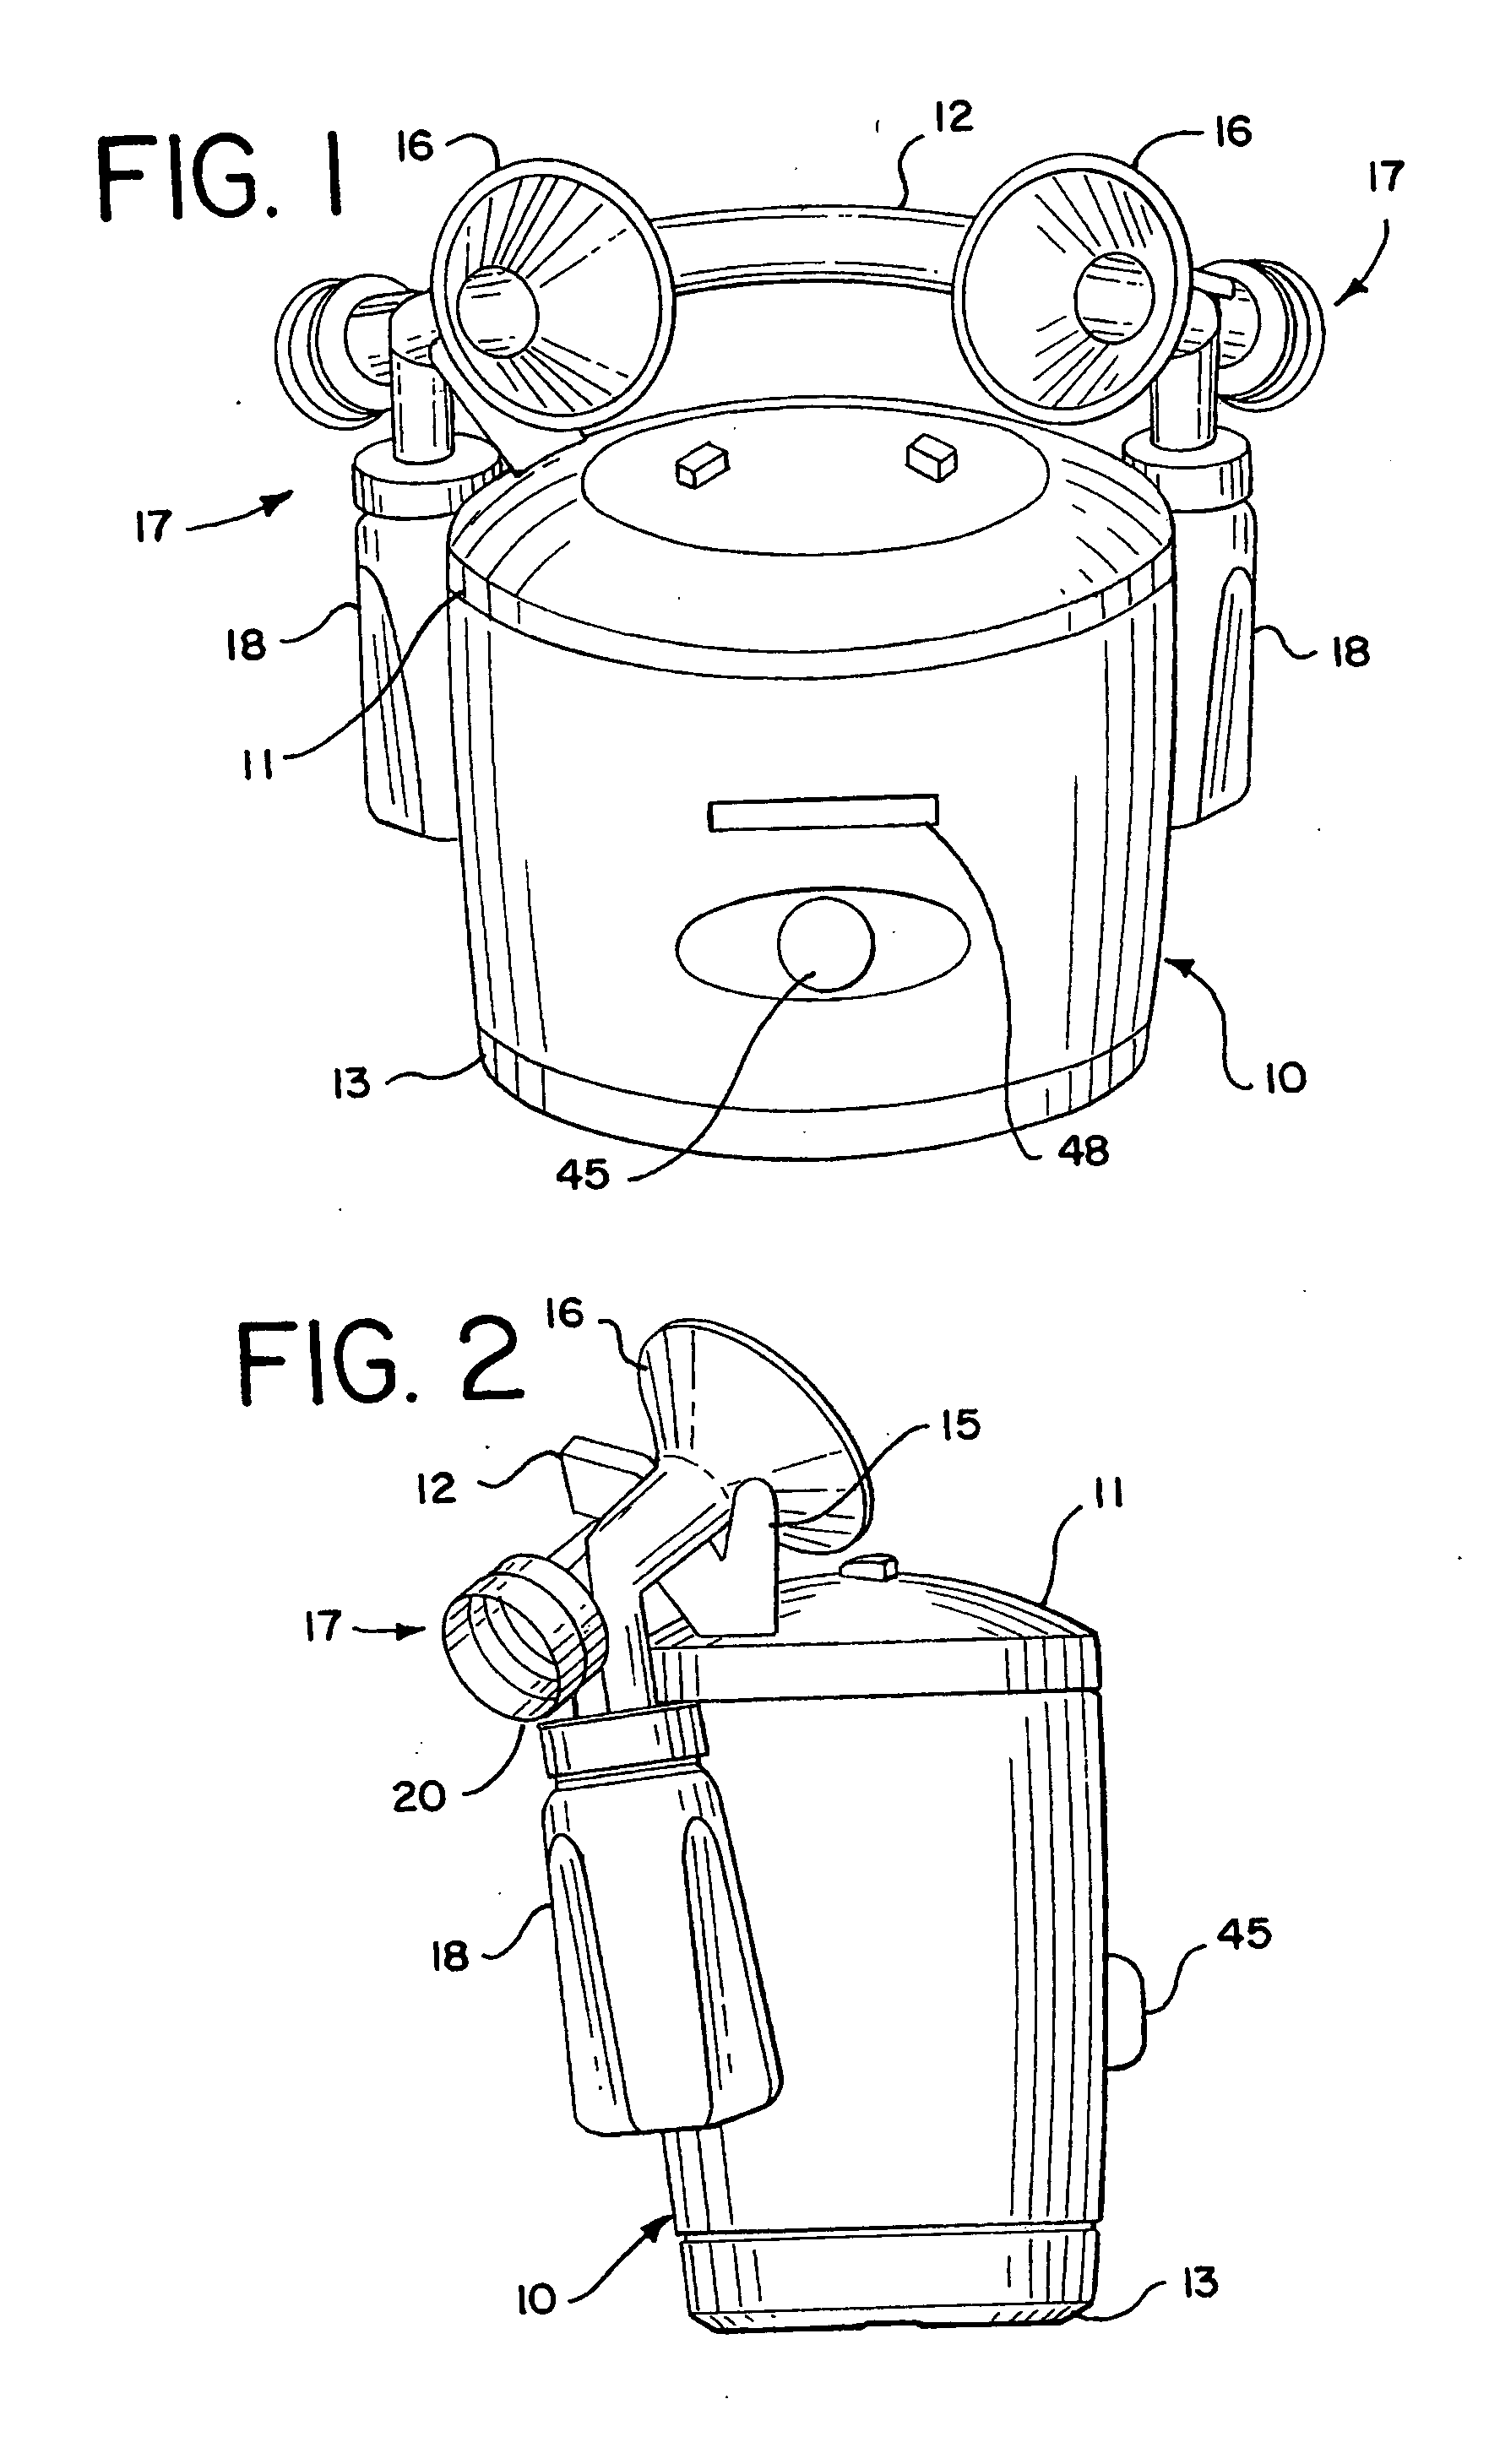 Suction sequences for a breastpump